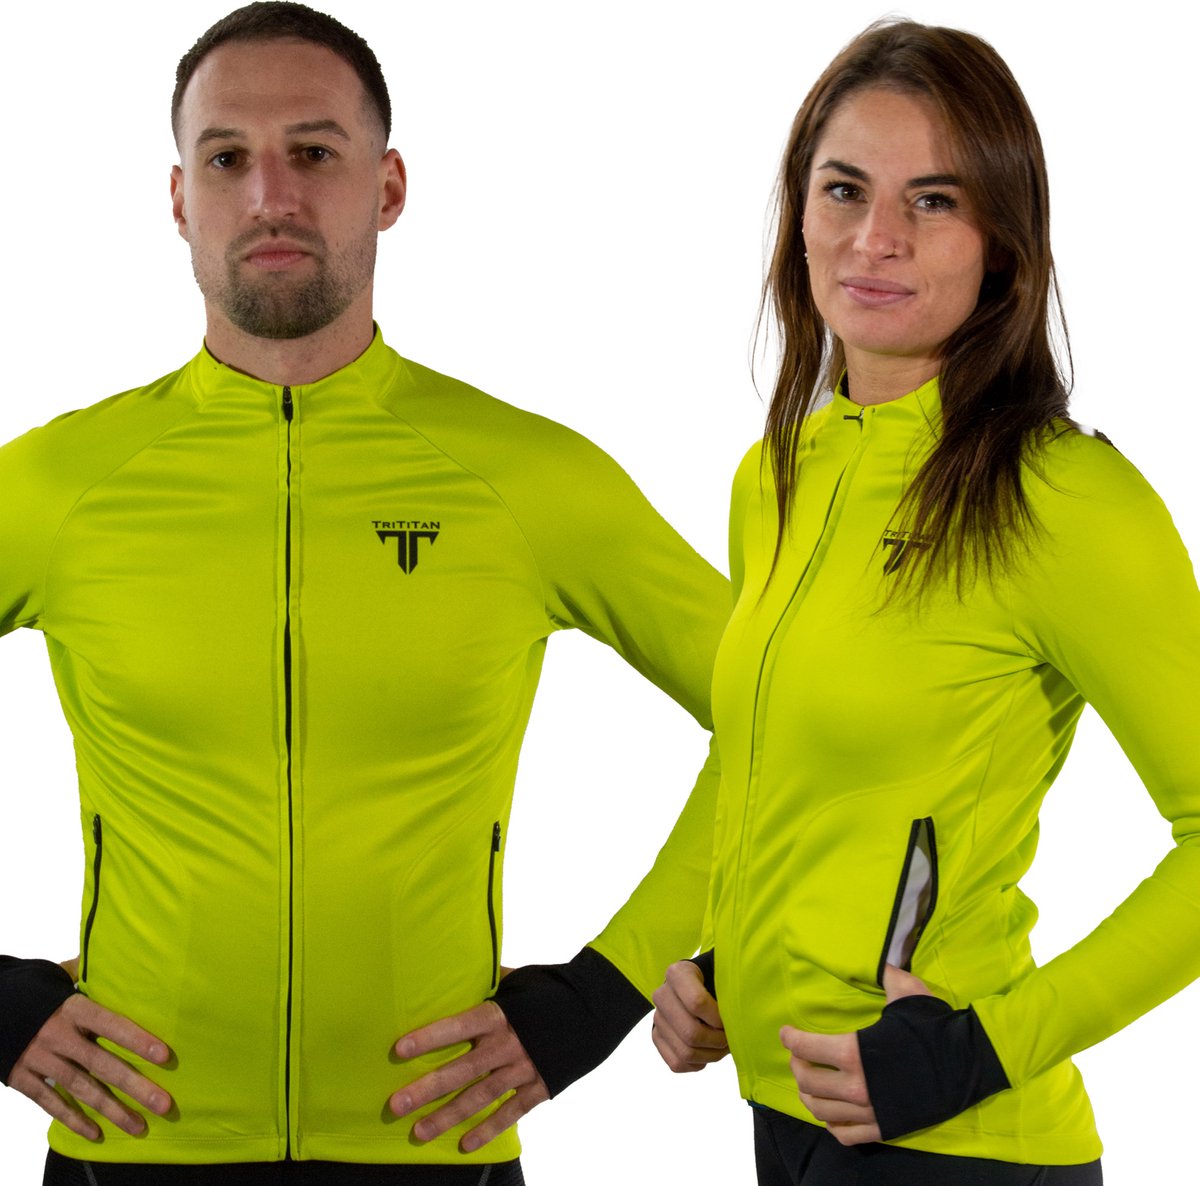 TriTiTan Thermal Jersey with 2 Front Zipper Pockets and Back Pockets - Thermische Jas - XL